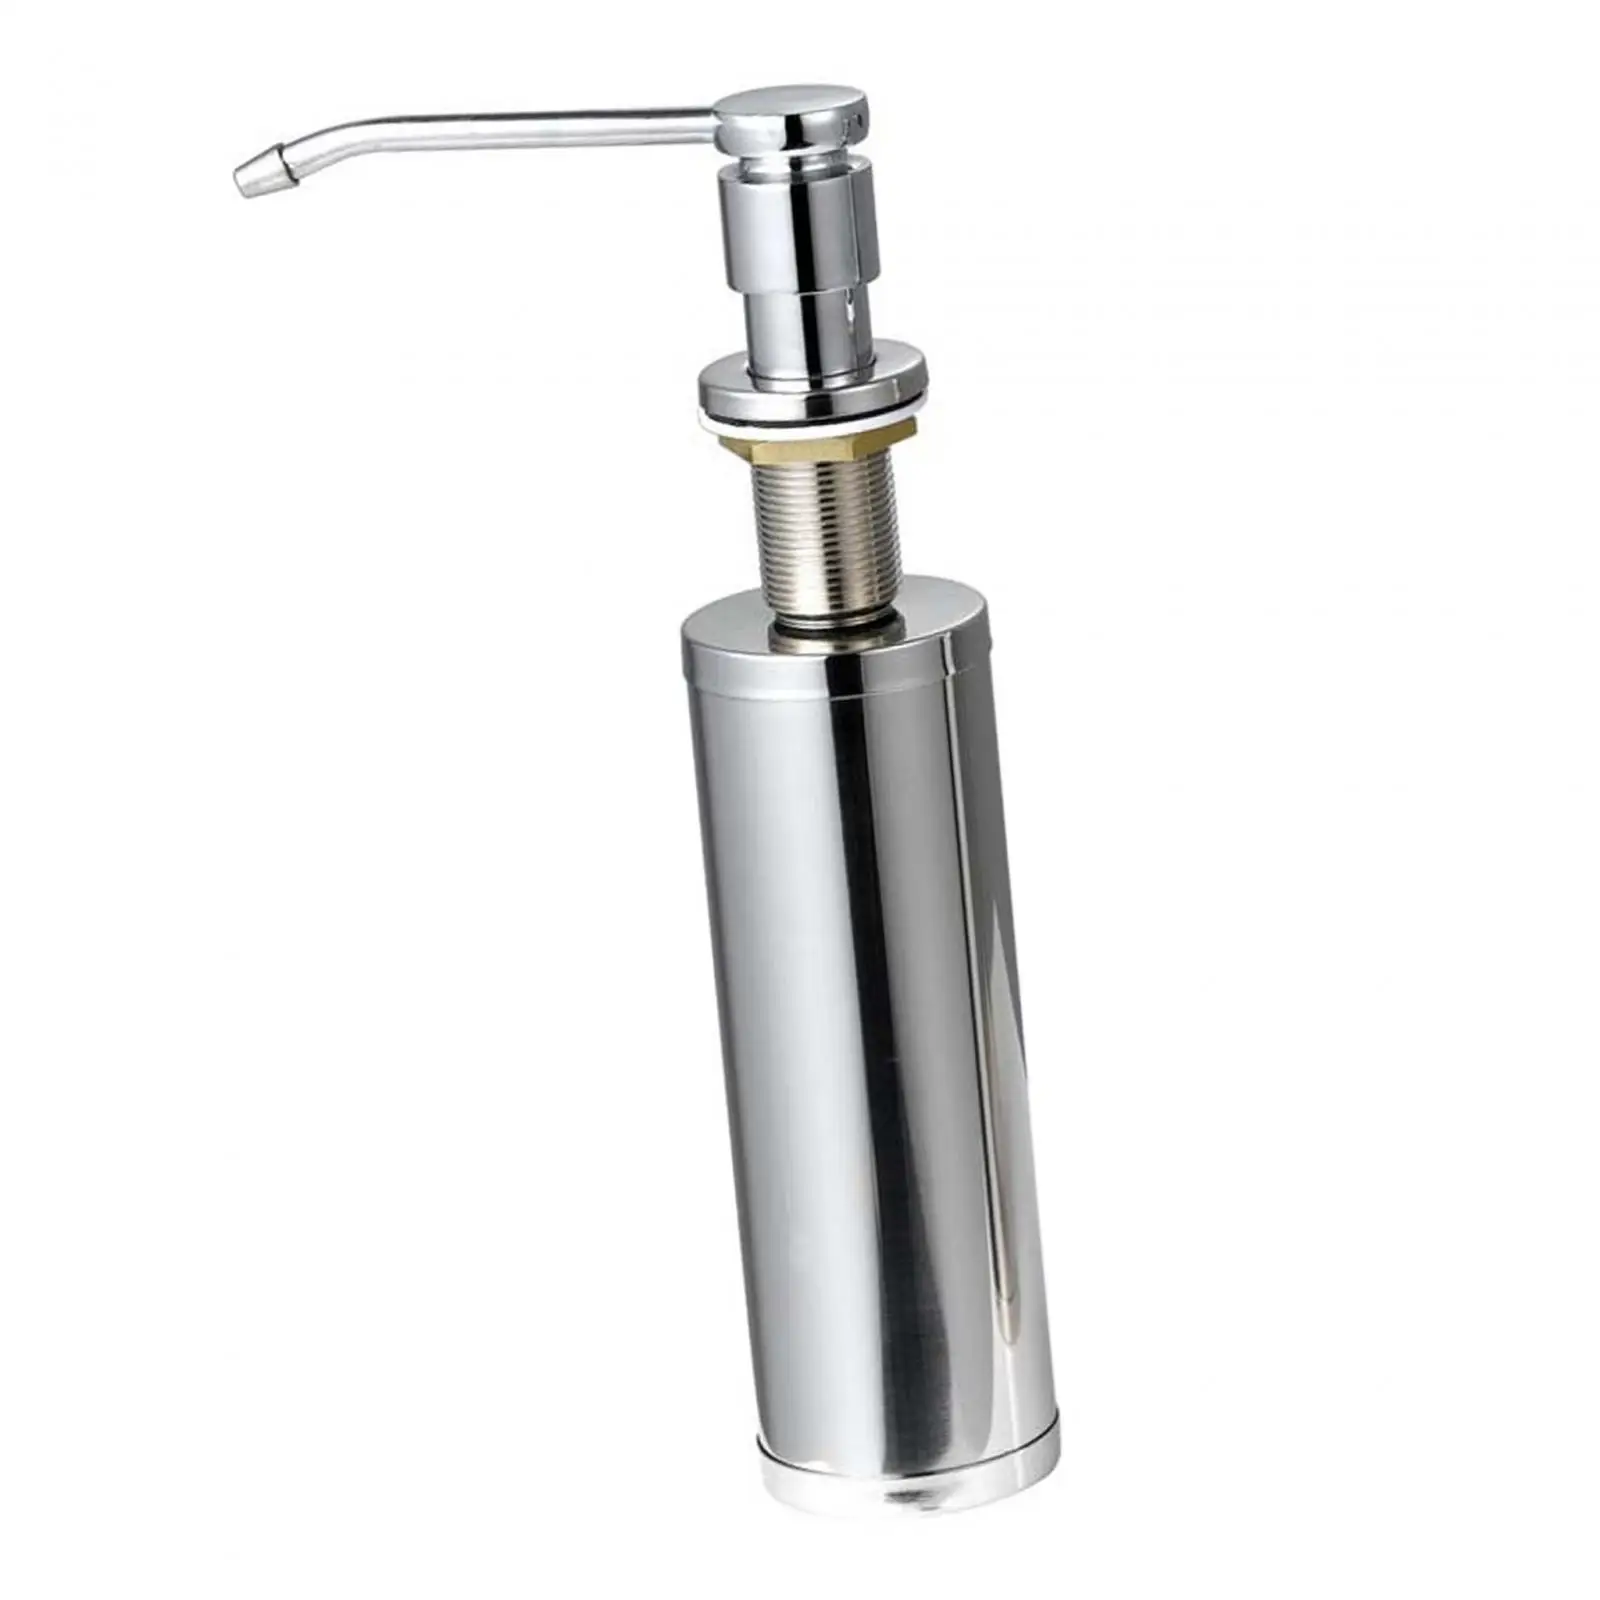 Dish Lotion Sink Dispenser Refill from The Top Built in Sink Soap Dispenser